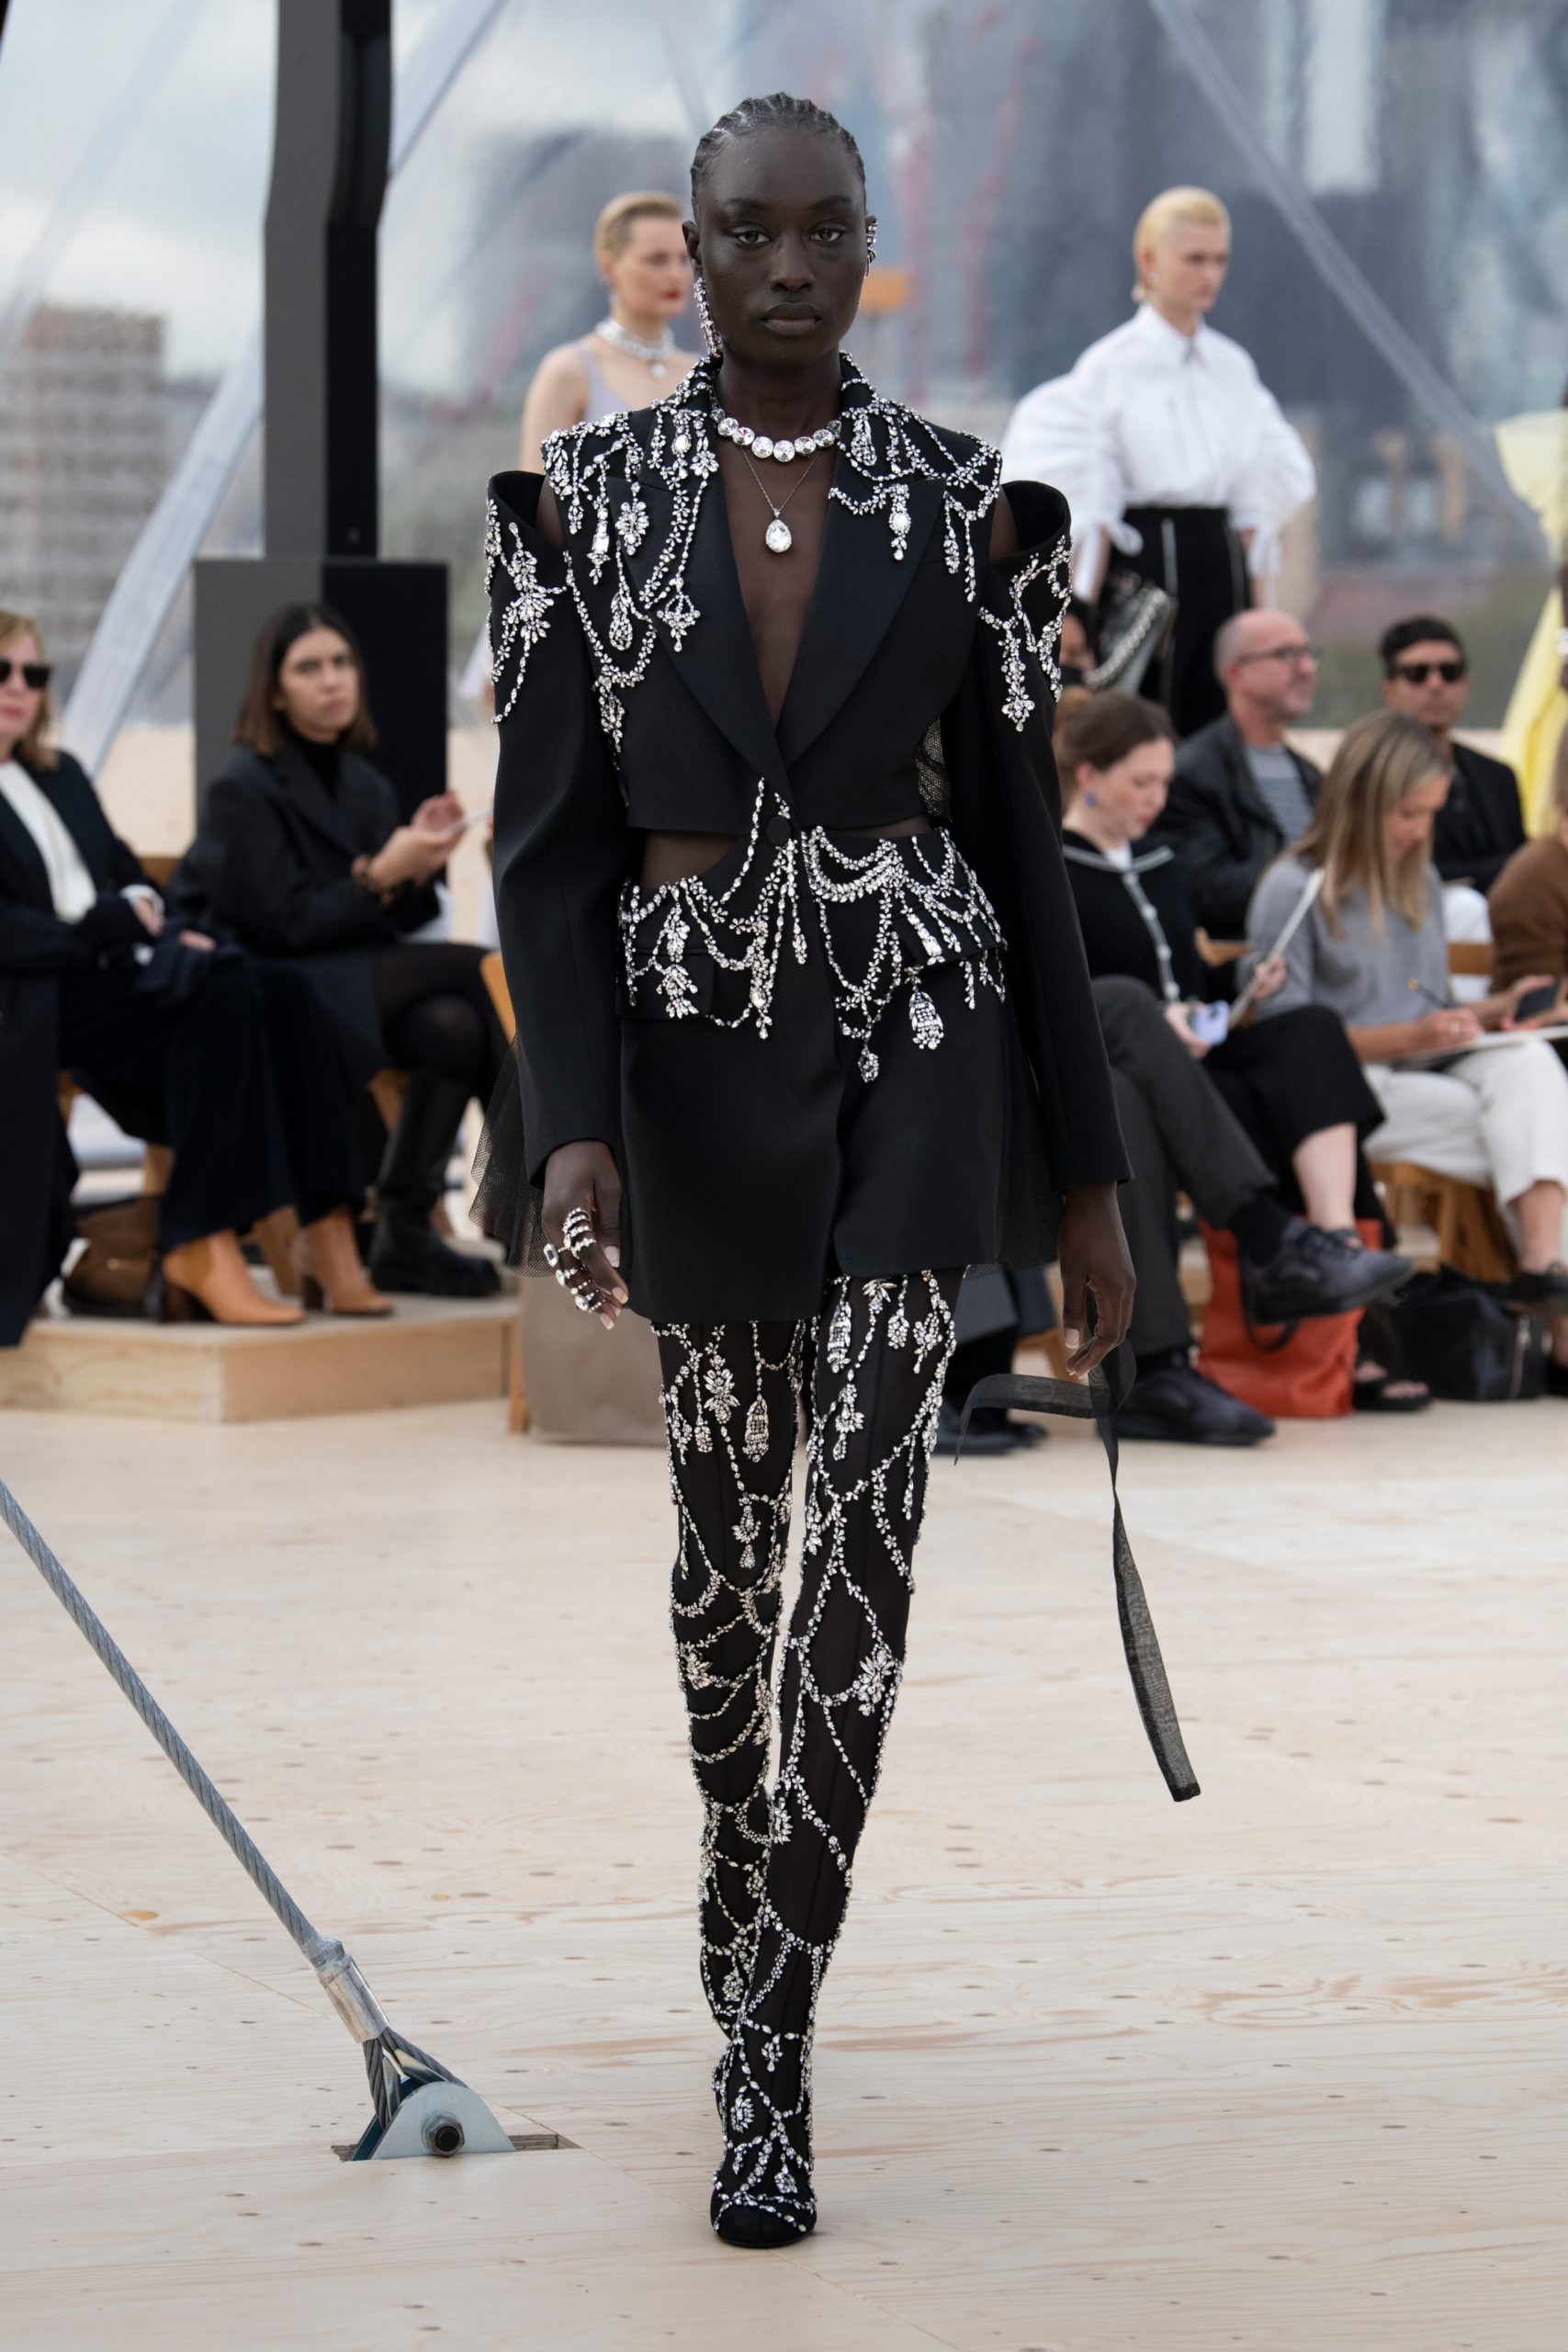 Alexander McQueen's Spring/Summer 2022 Collection is an Ode to